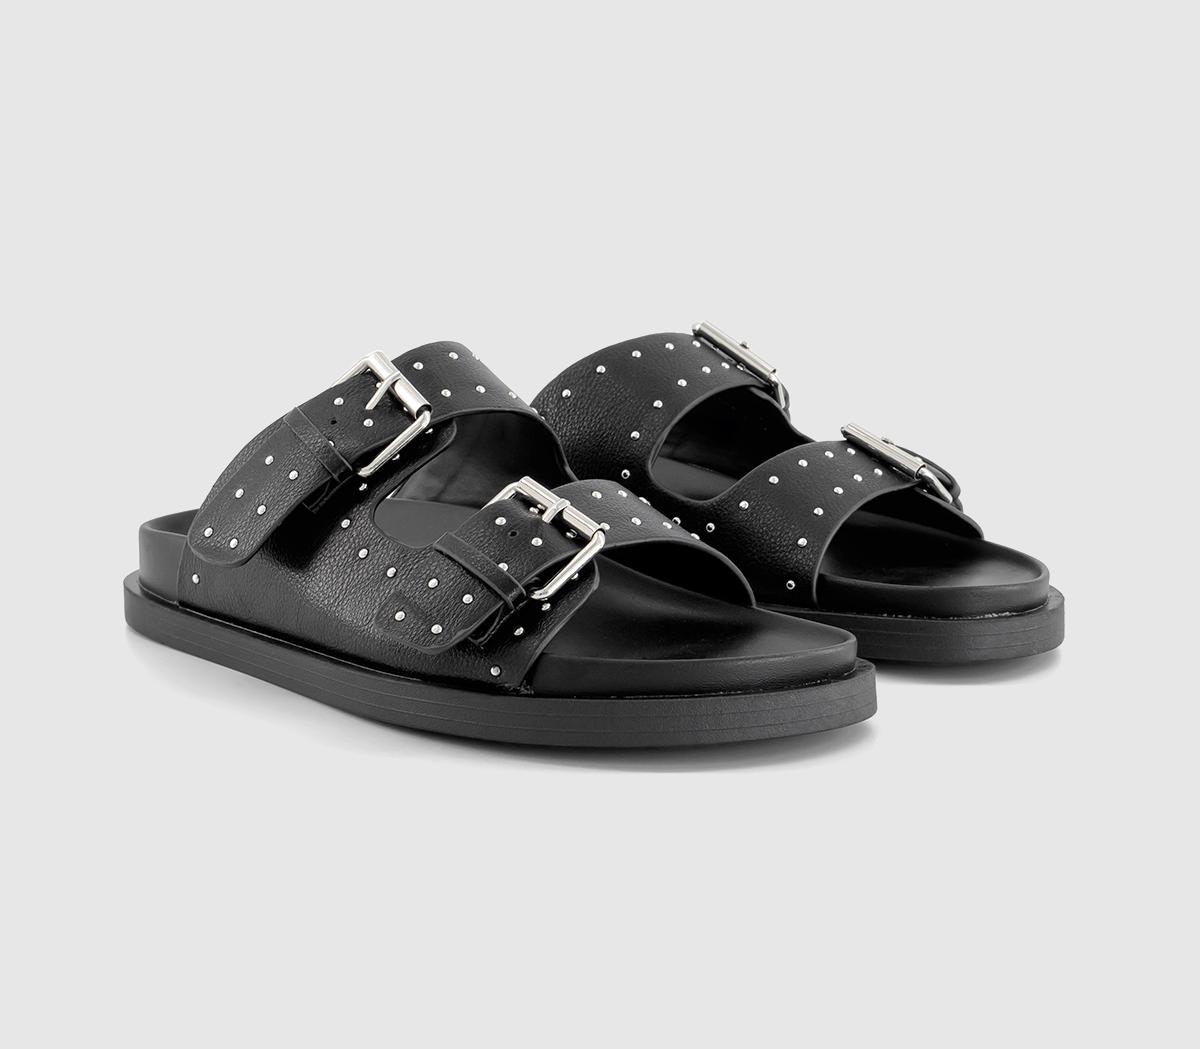 OFFICE Womens Scarlett Double Strap Studded Footbed Sandals Black, 3